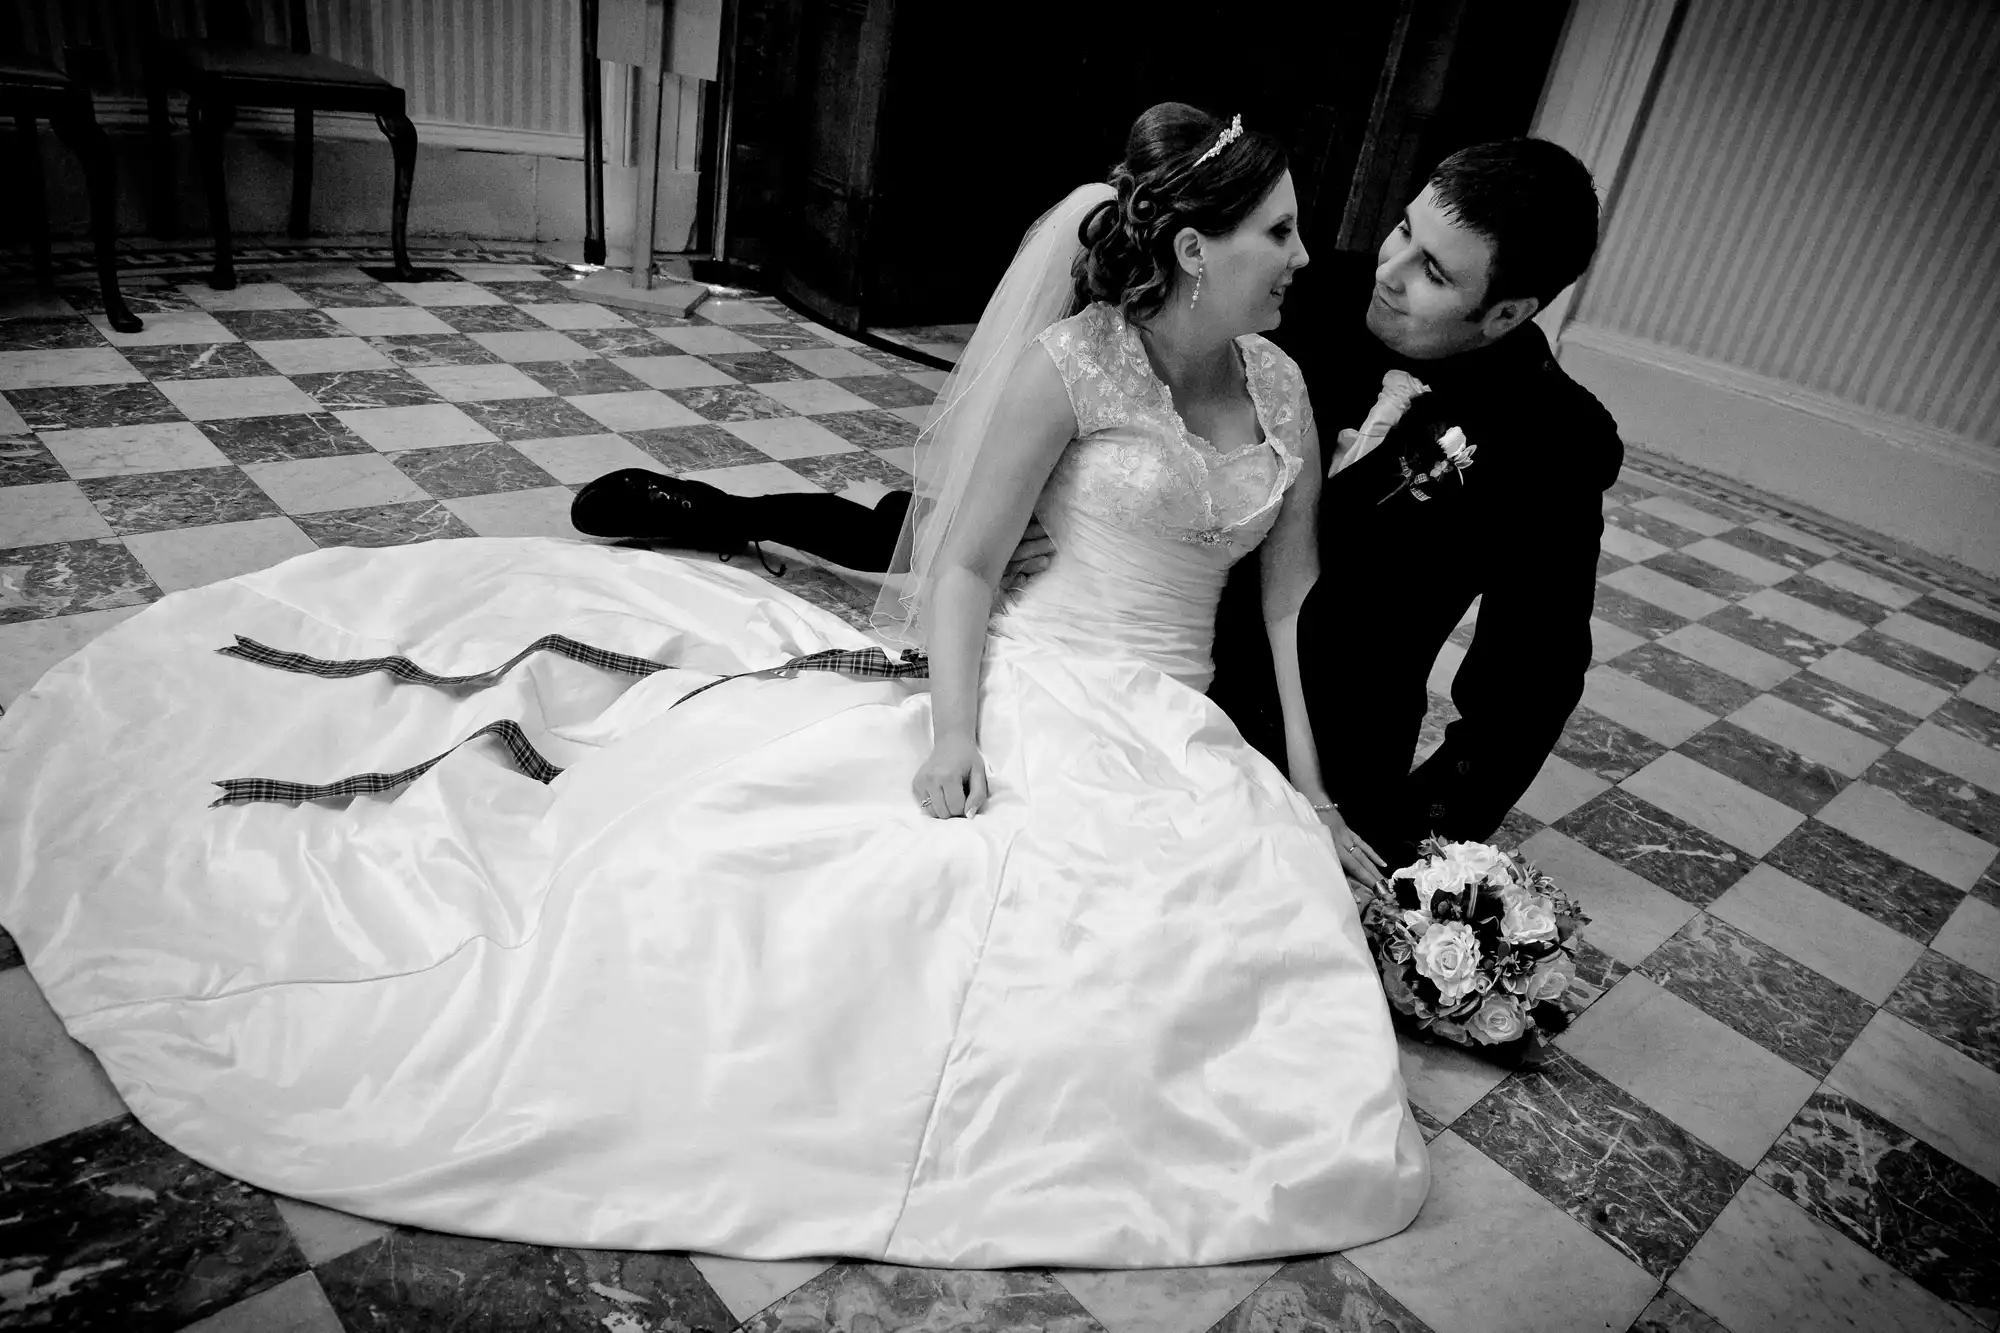 A bride in a white gown and a groom in a suit sitting closely on a checkered floor, gazing into each other's eyes.